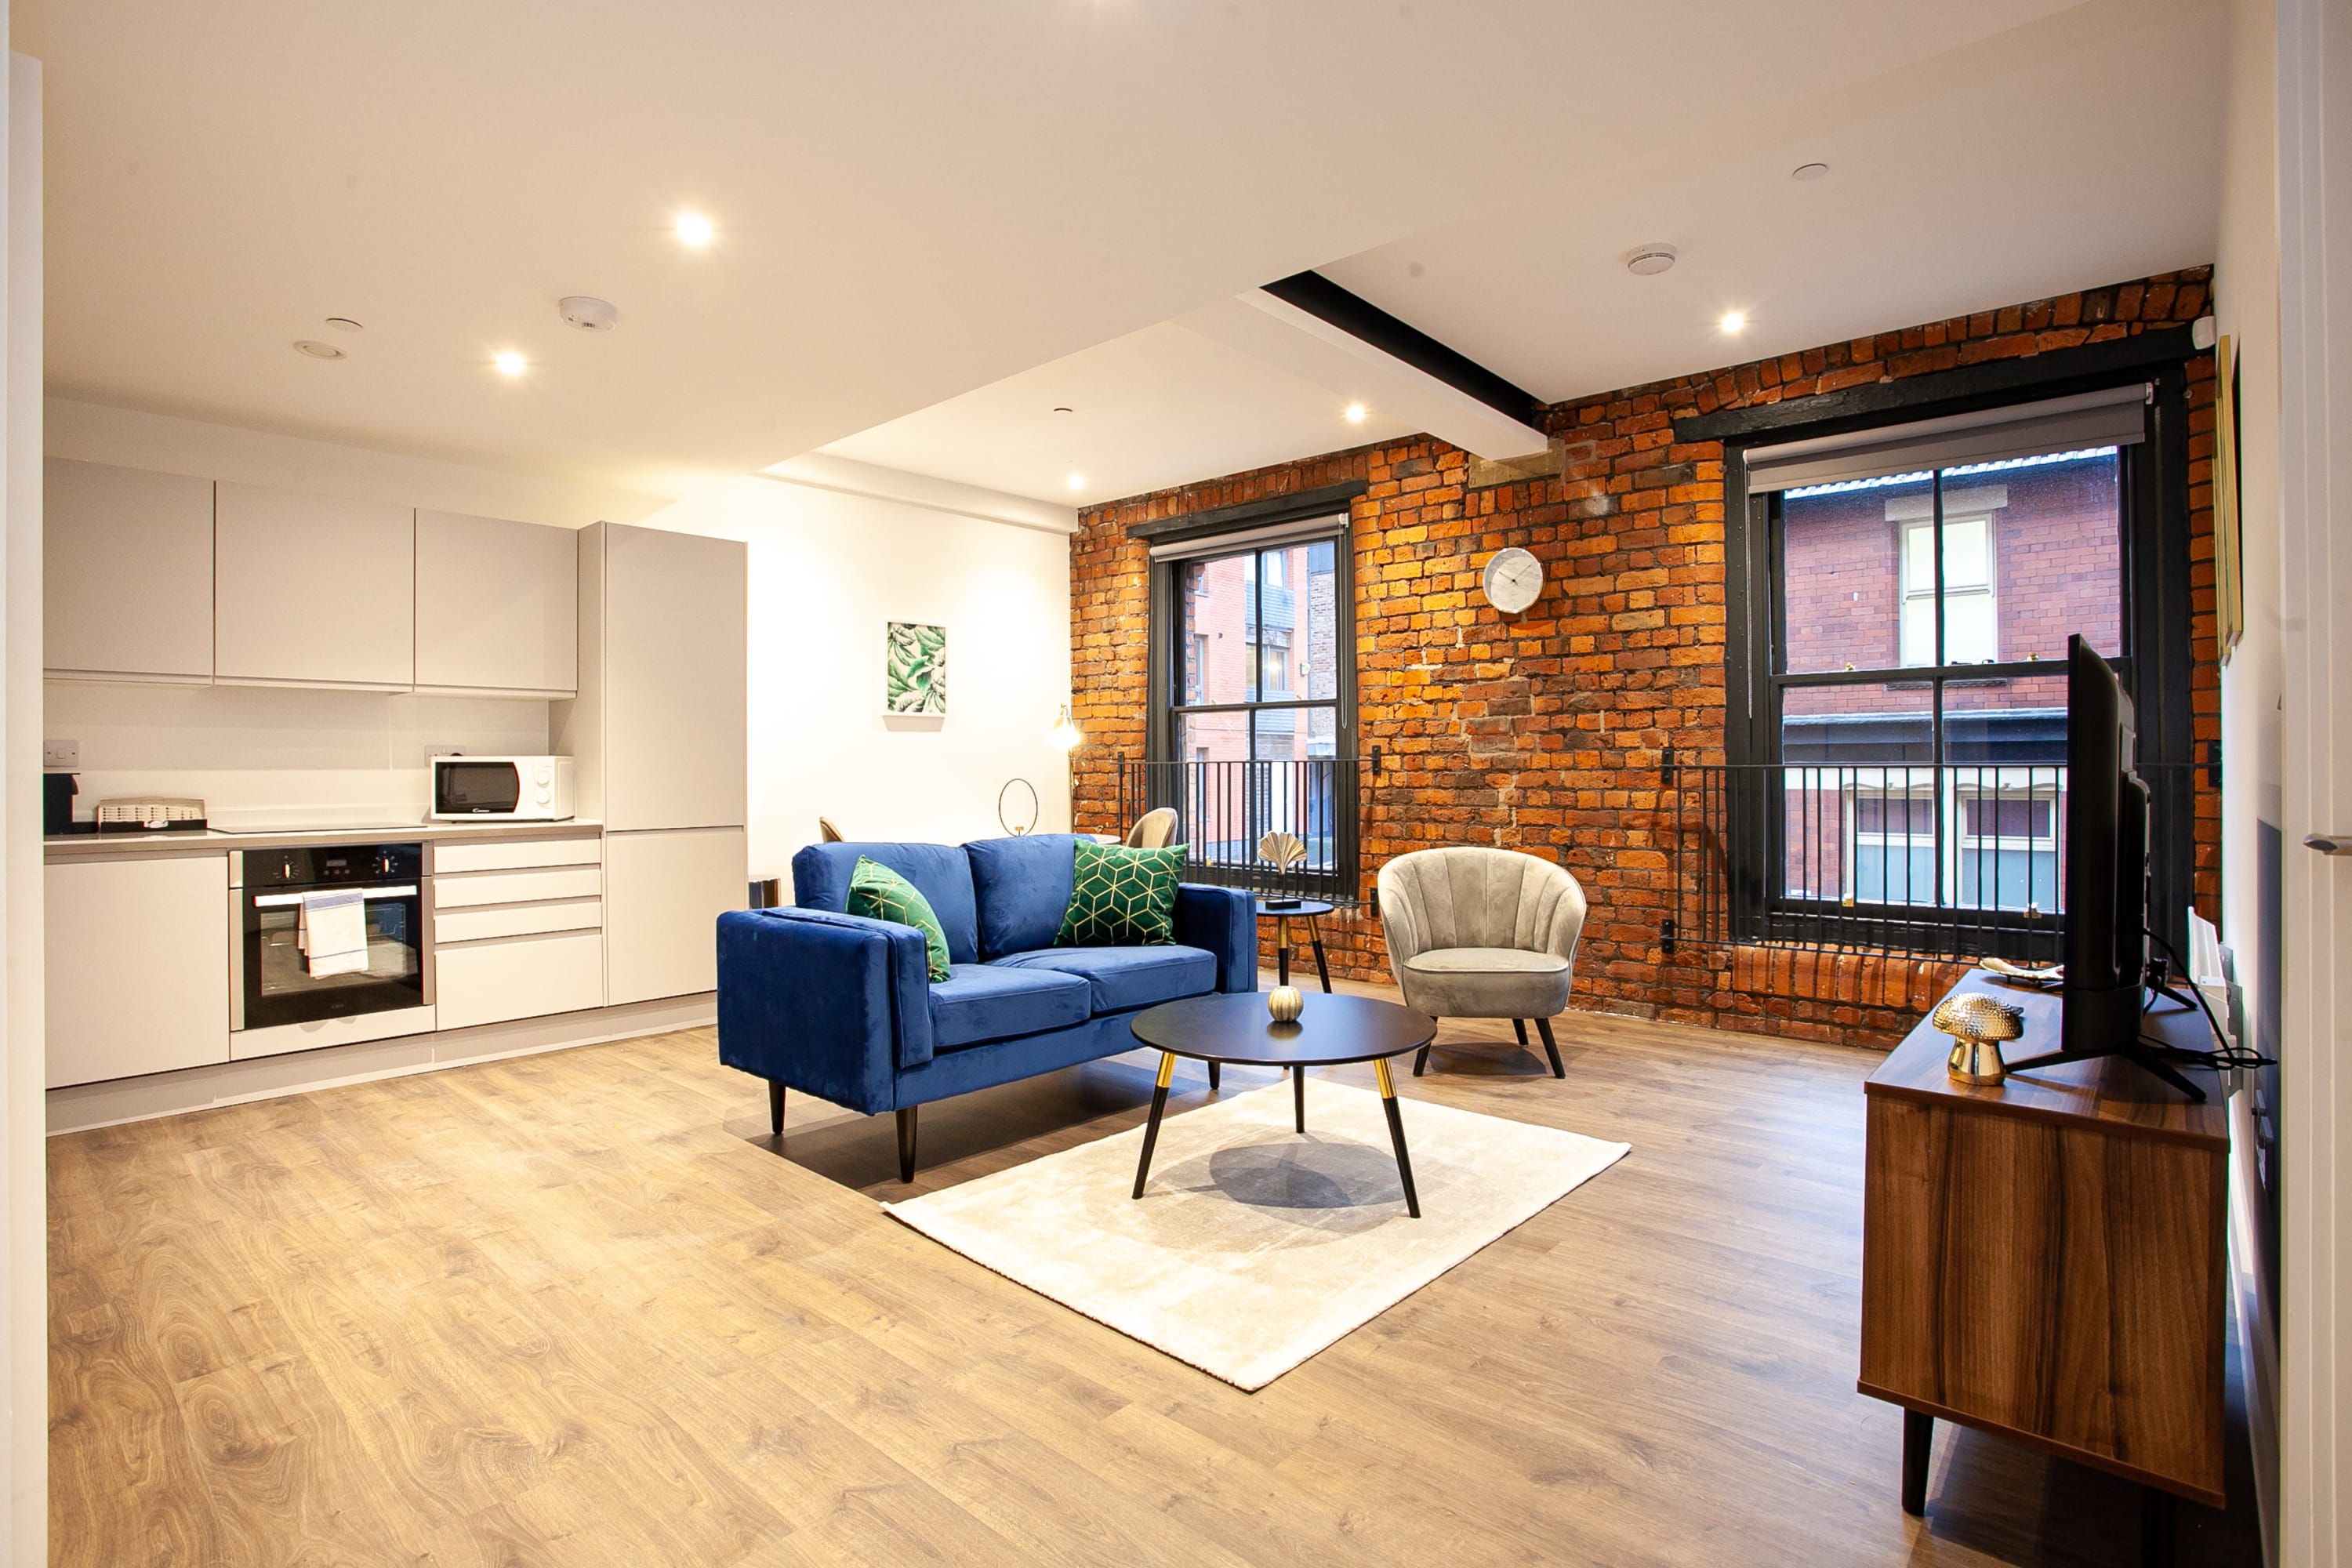 Property Image 1 - Stunning 1 Bedroom Apartment in a Converted Printing Press